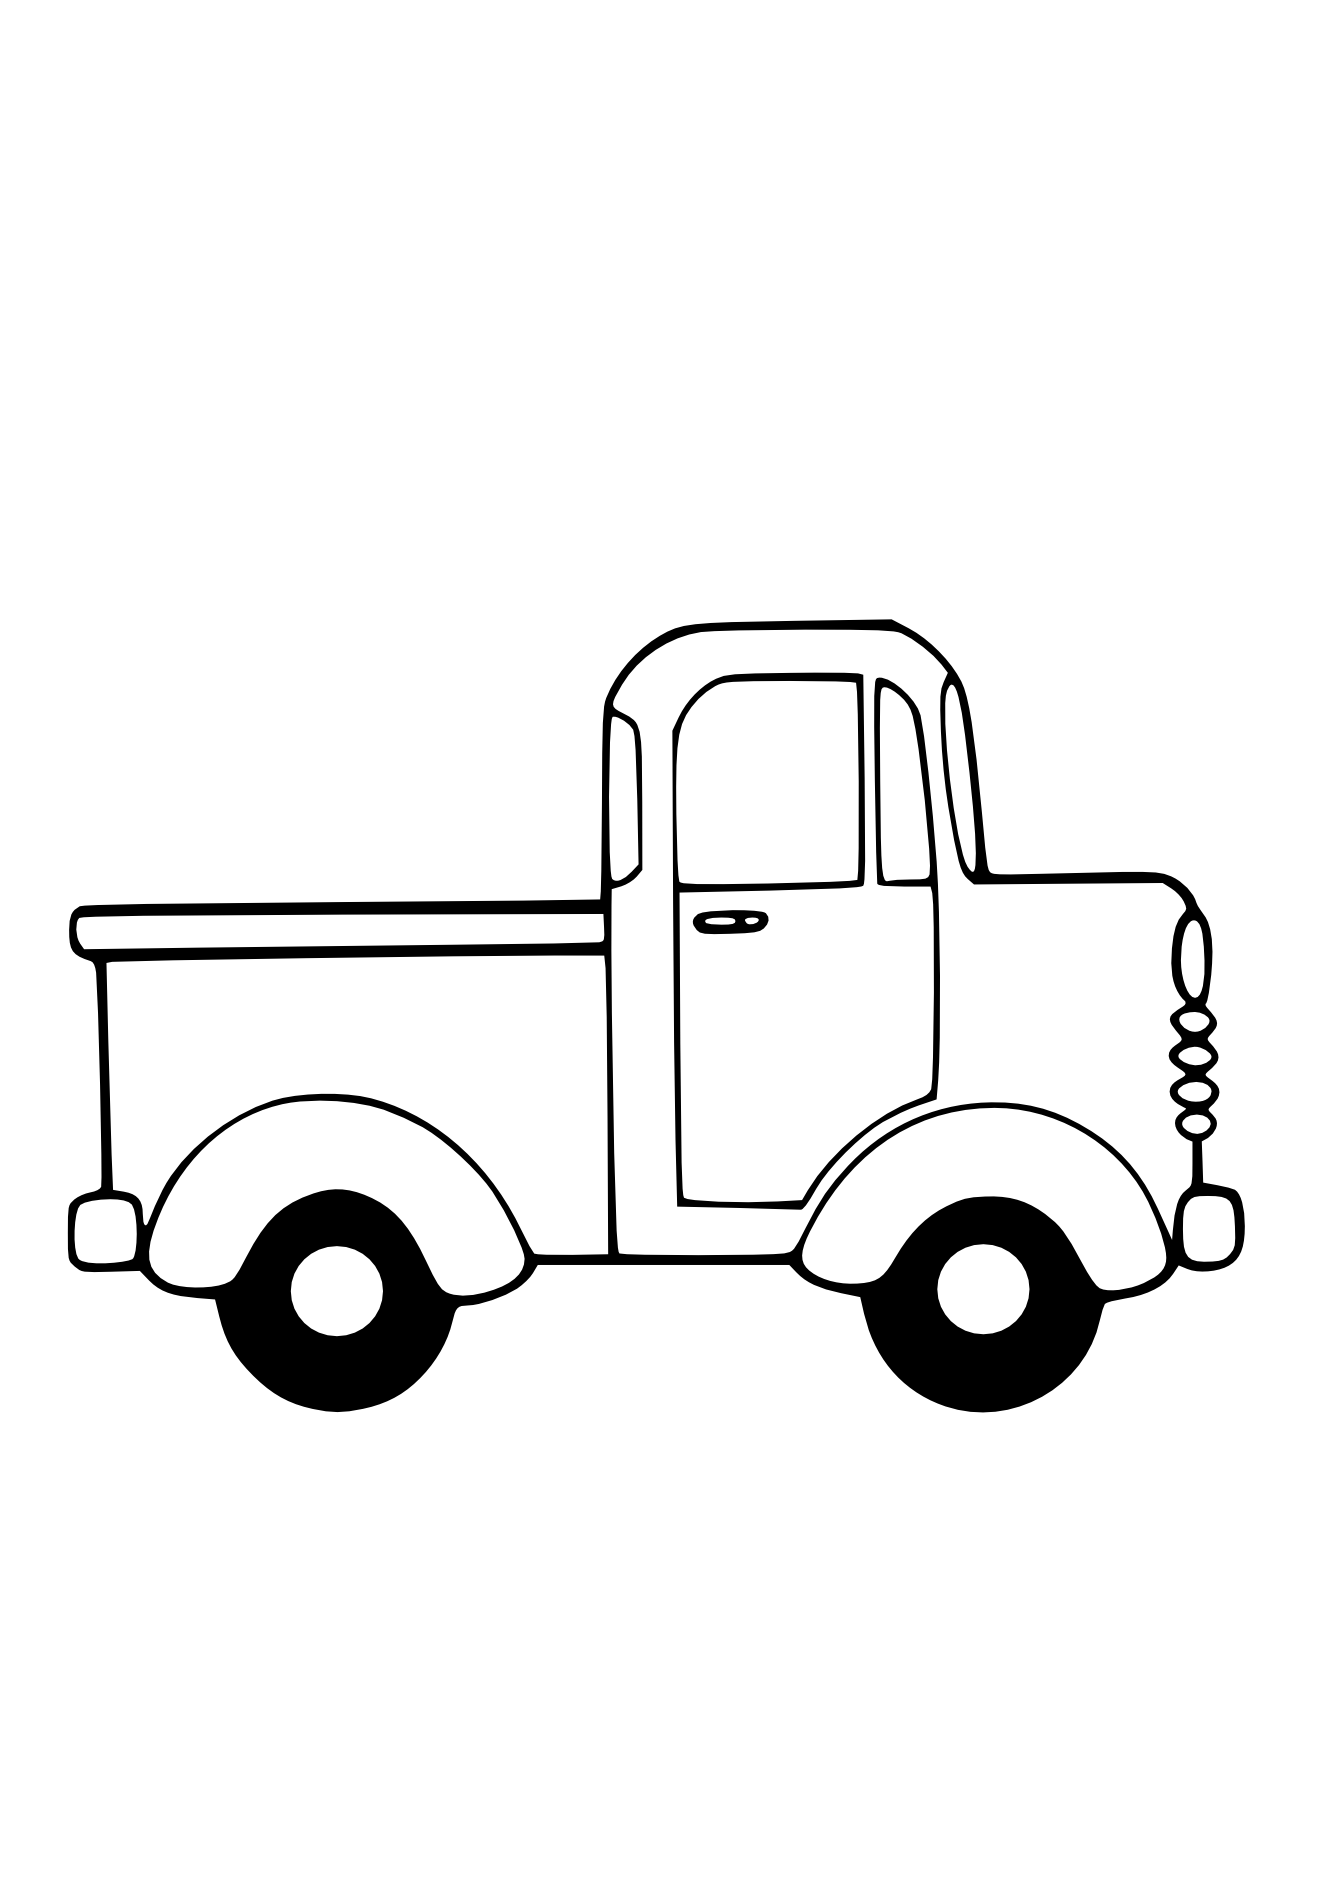 Car  black and white car clipart black and white free images 7